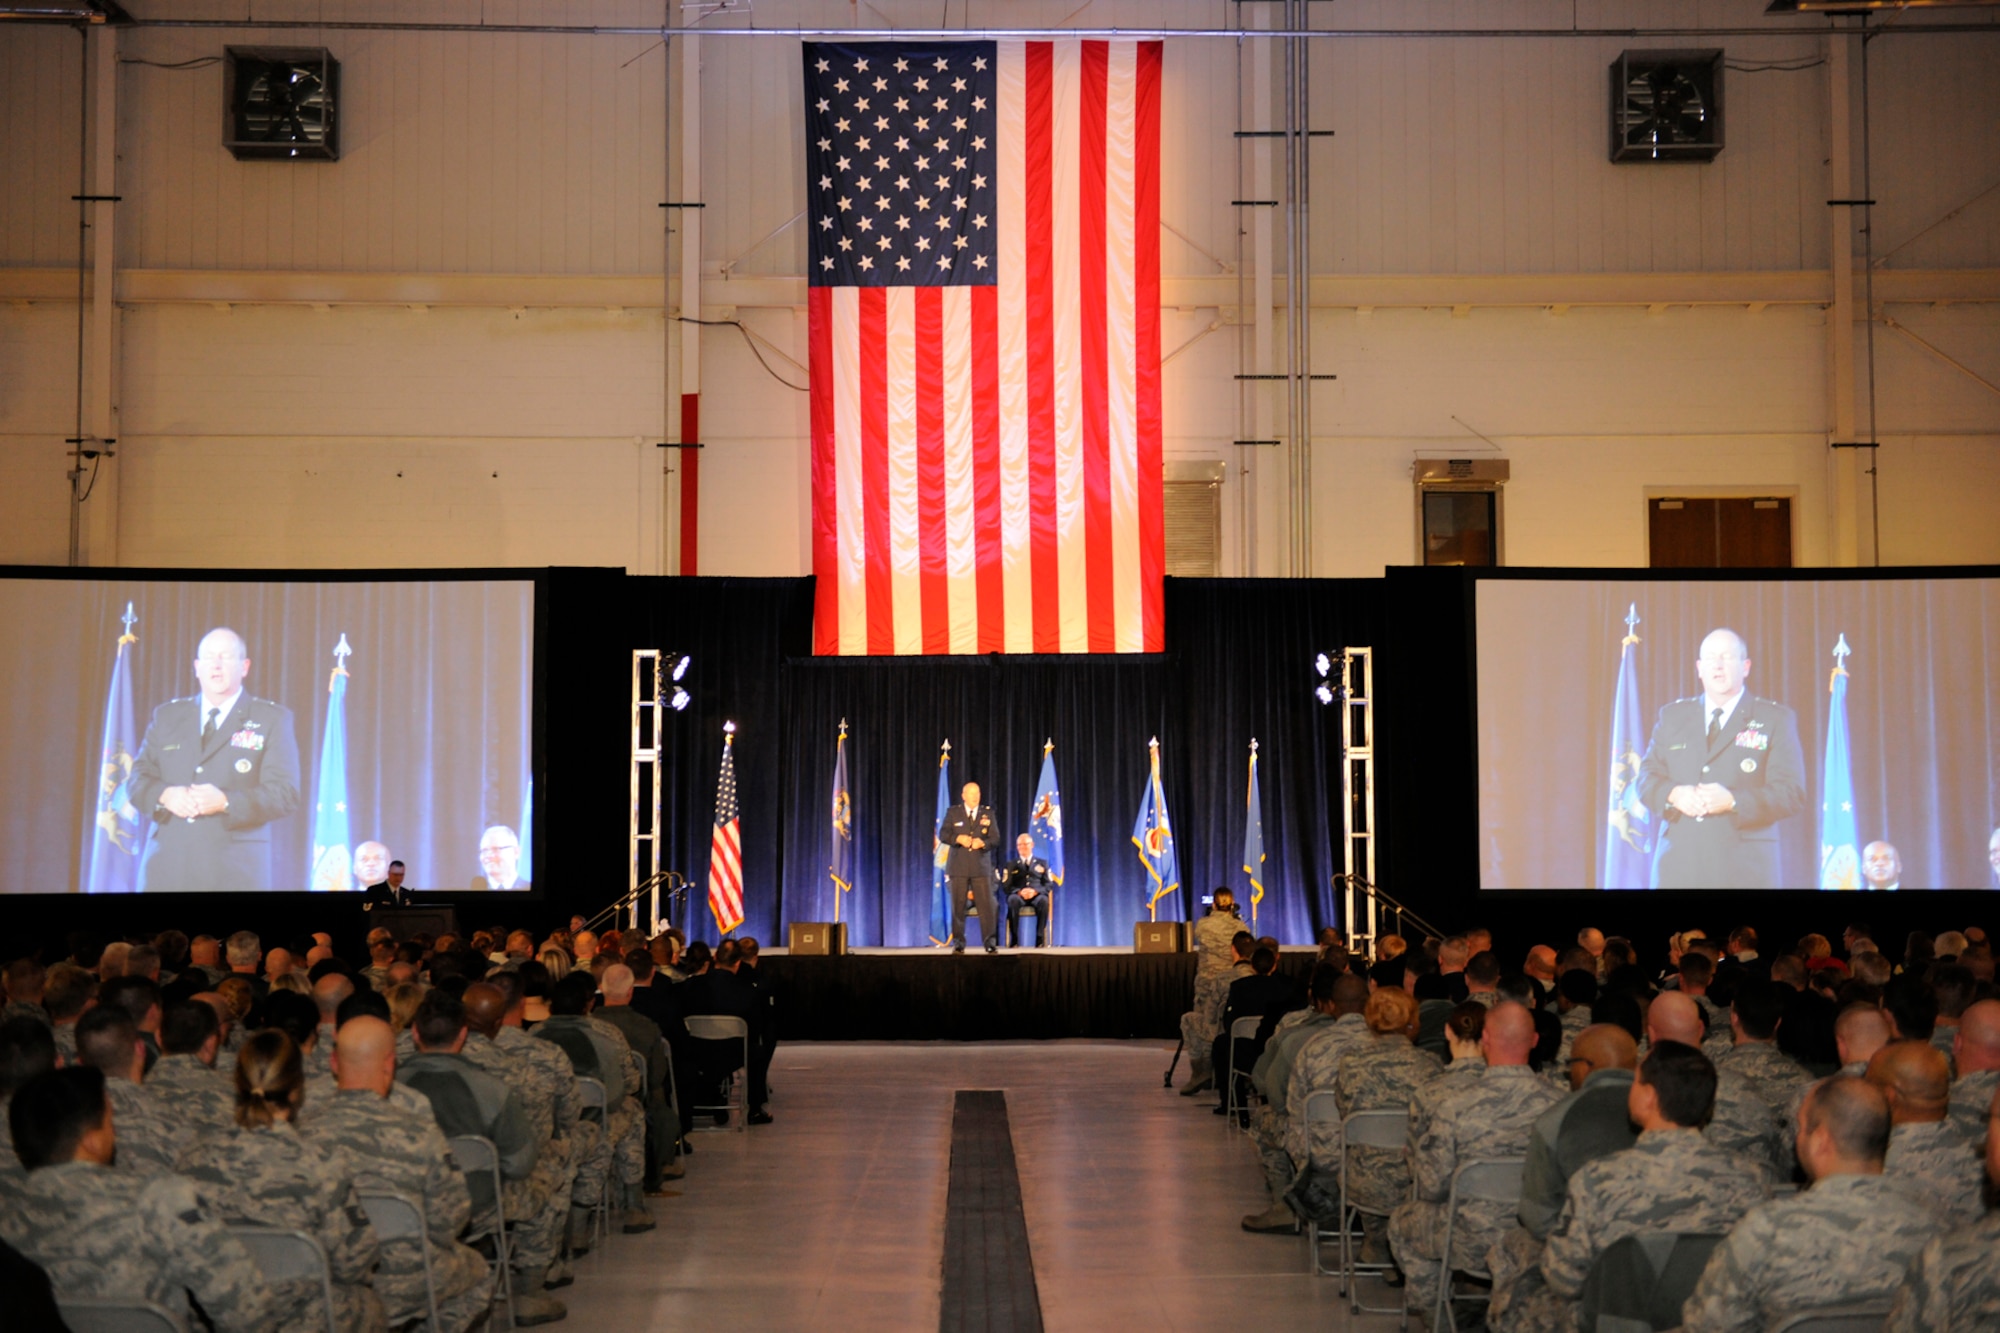 Brig. Gen. John D. Slocum, 127th Wing commander, addresses the assembled Airmen of the Wing during the Wing’s annual awards ceremony at Selfridge Air National Guard Base, Mich., Dec. 5, 2015. The ceremony recognizes the accomplishments of individual Airmen and of the Wing as a whole. (U.S. Air National Guard photo by Master Sgt. David Kujawa)